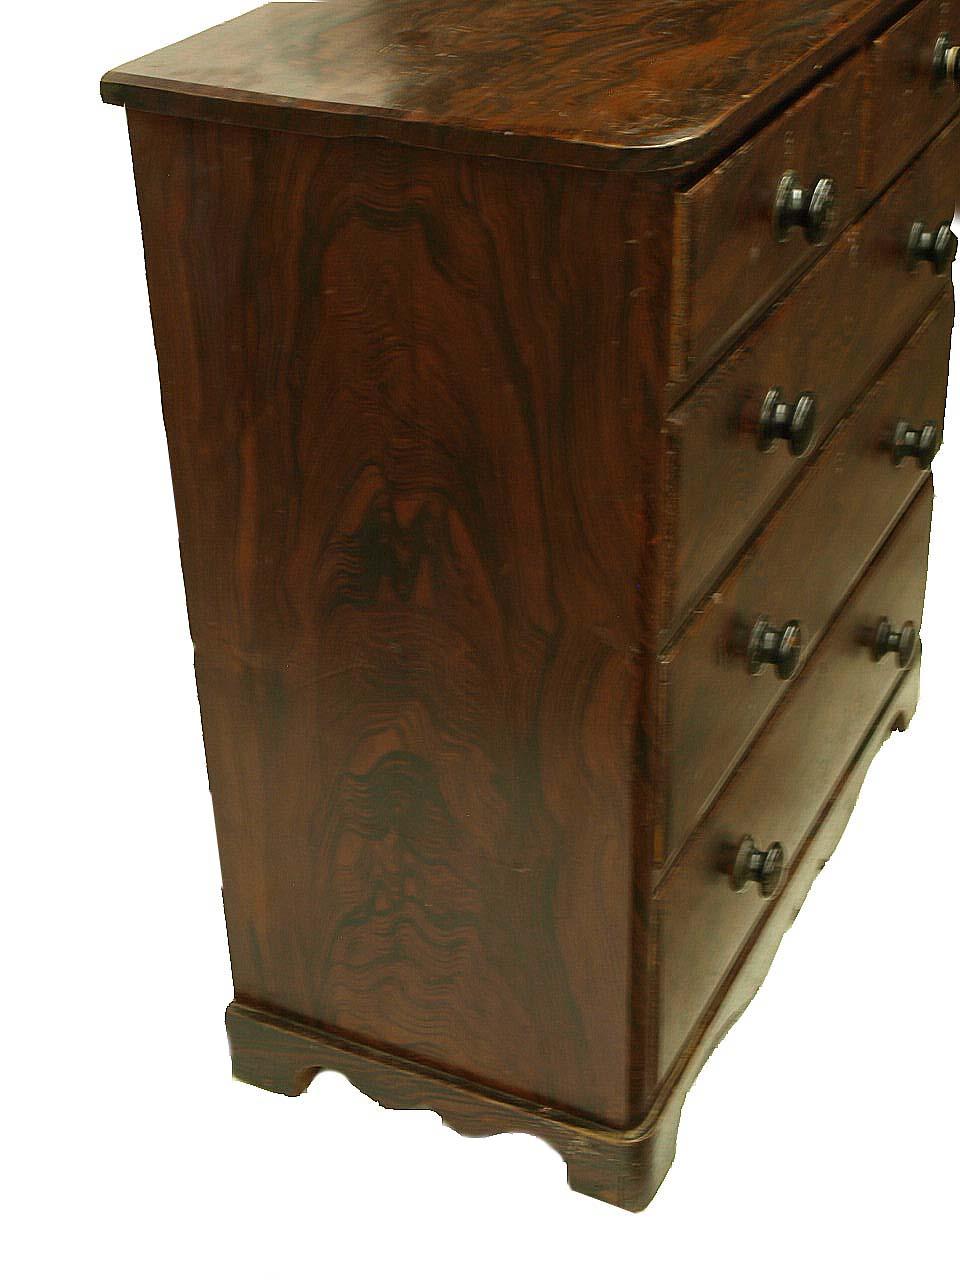 English grain painted chest, the two over three drawers with original wood knobs, the artist using bold design appears to be simulating rosewood. The base has a serpentine shape and is original.